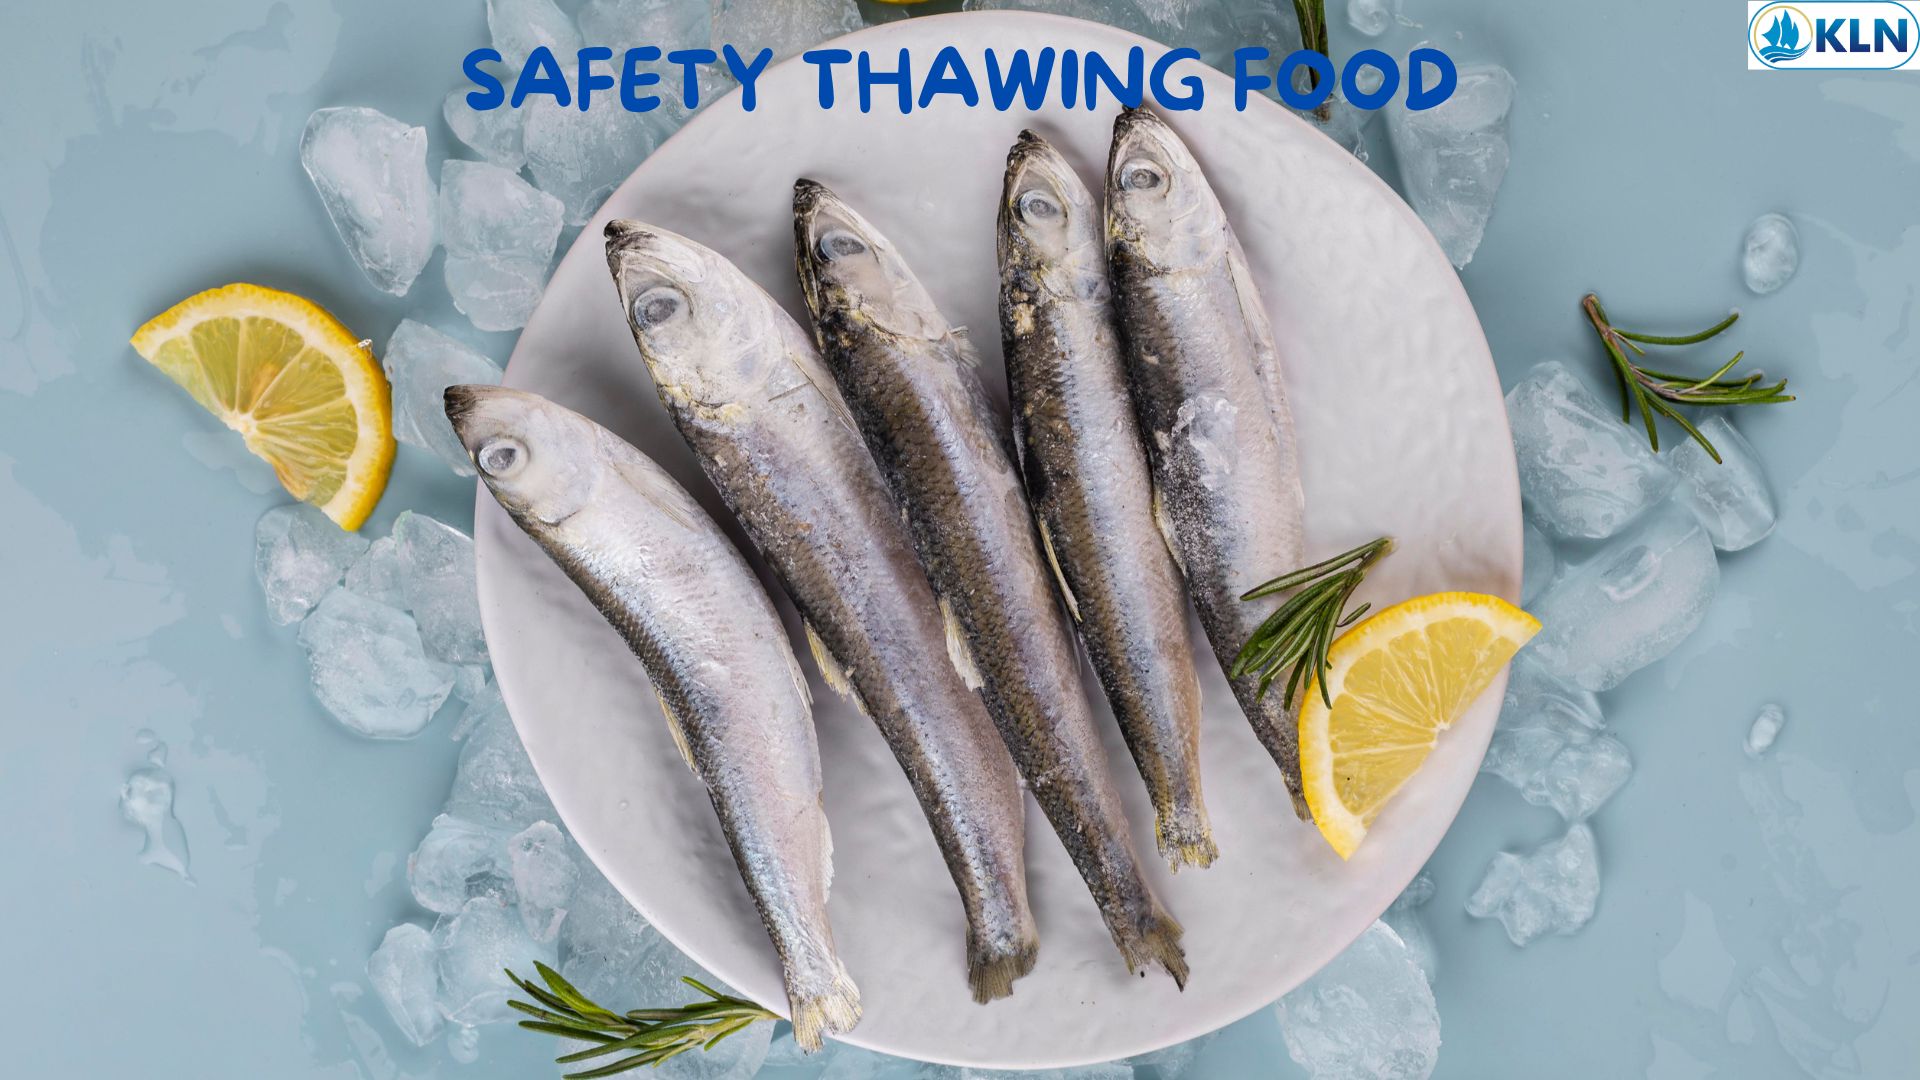 SAFETY THAWING FOOD